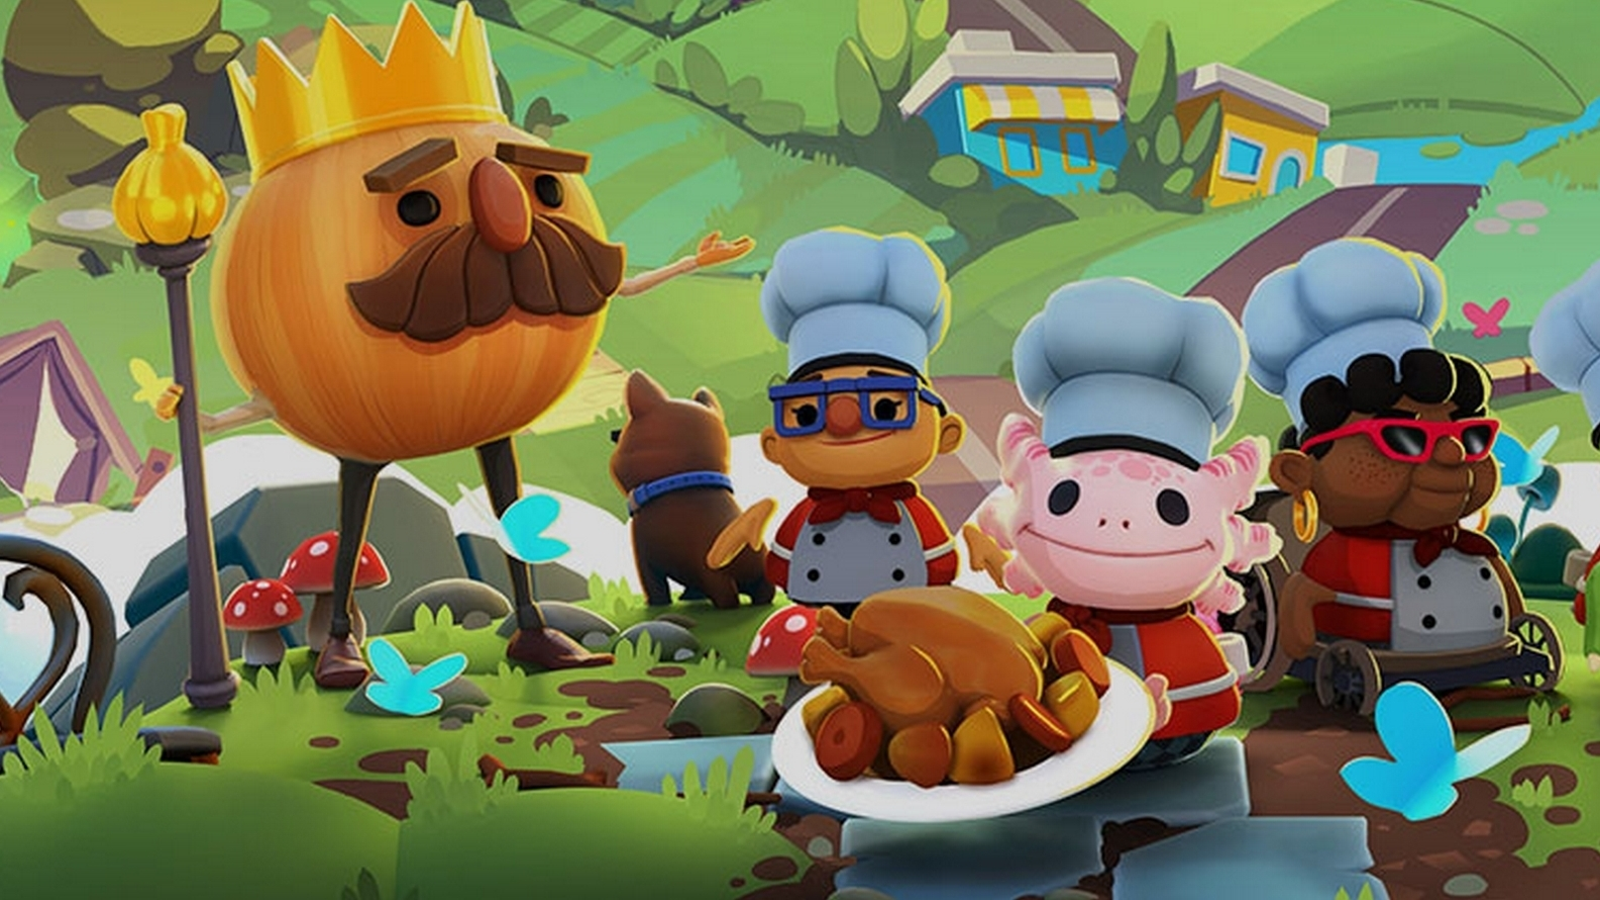 Overcooked: All You Can Eat Coming To All Consoles With Crossplay